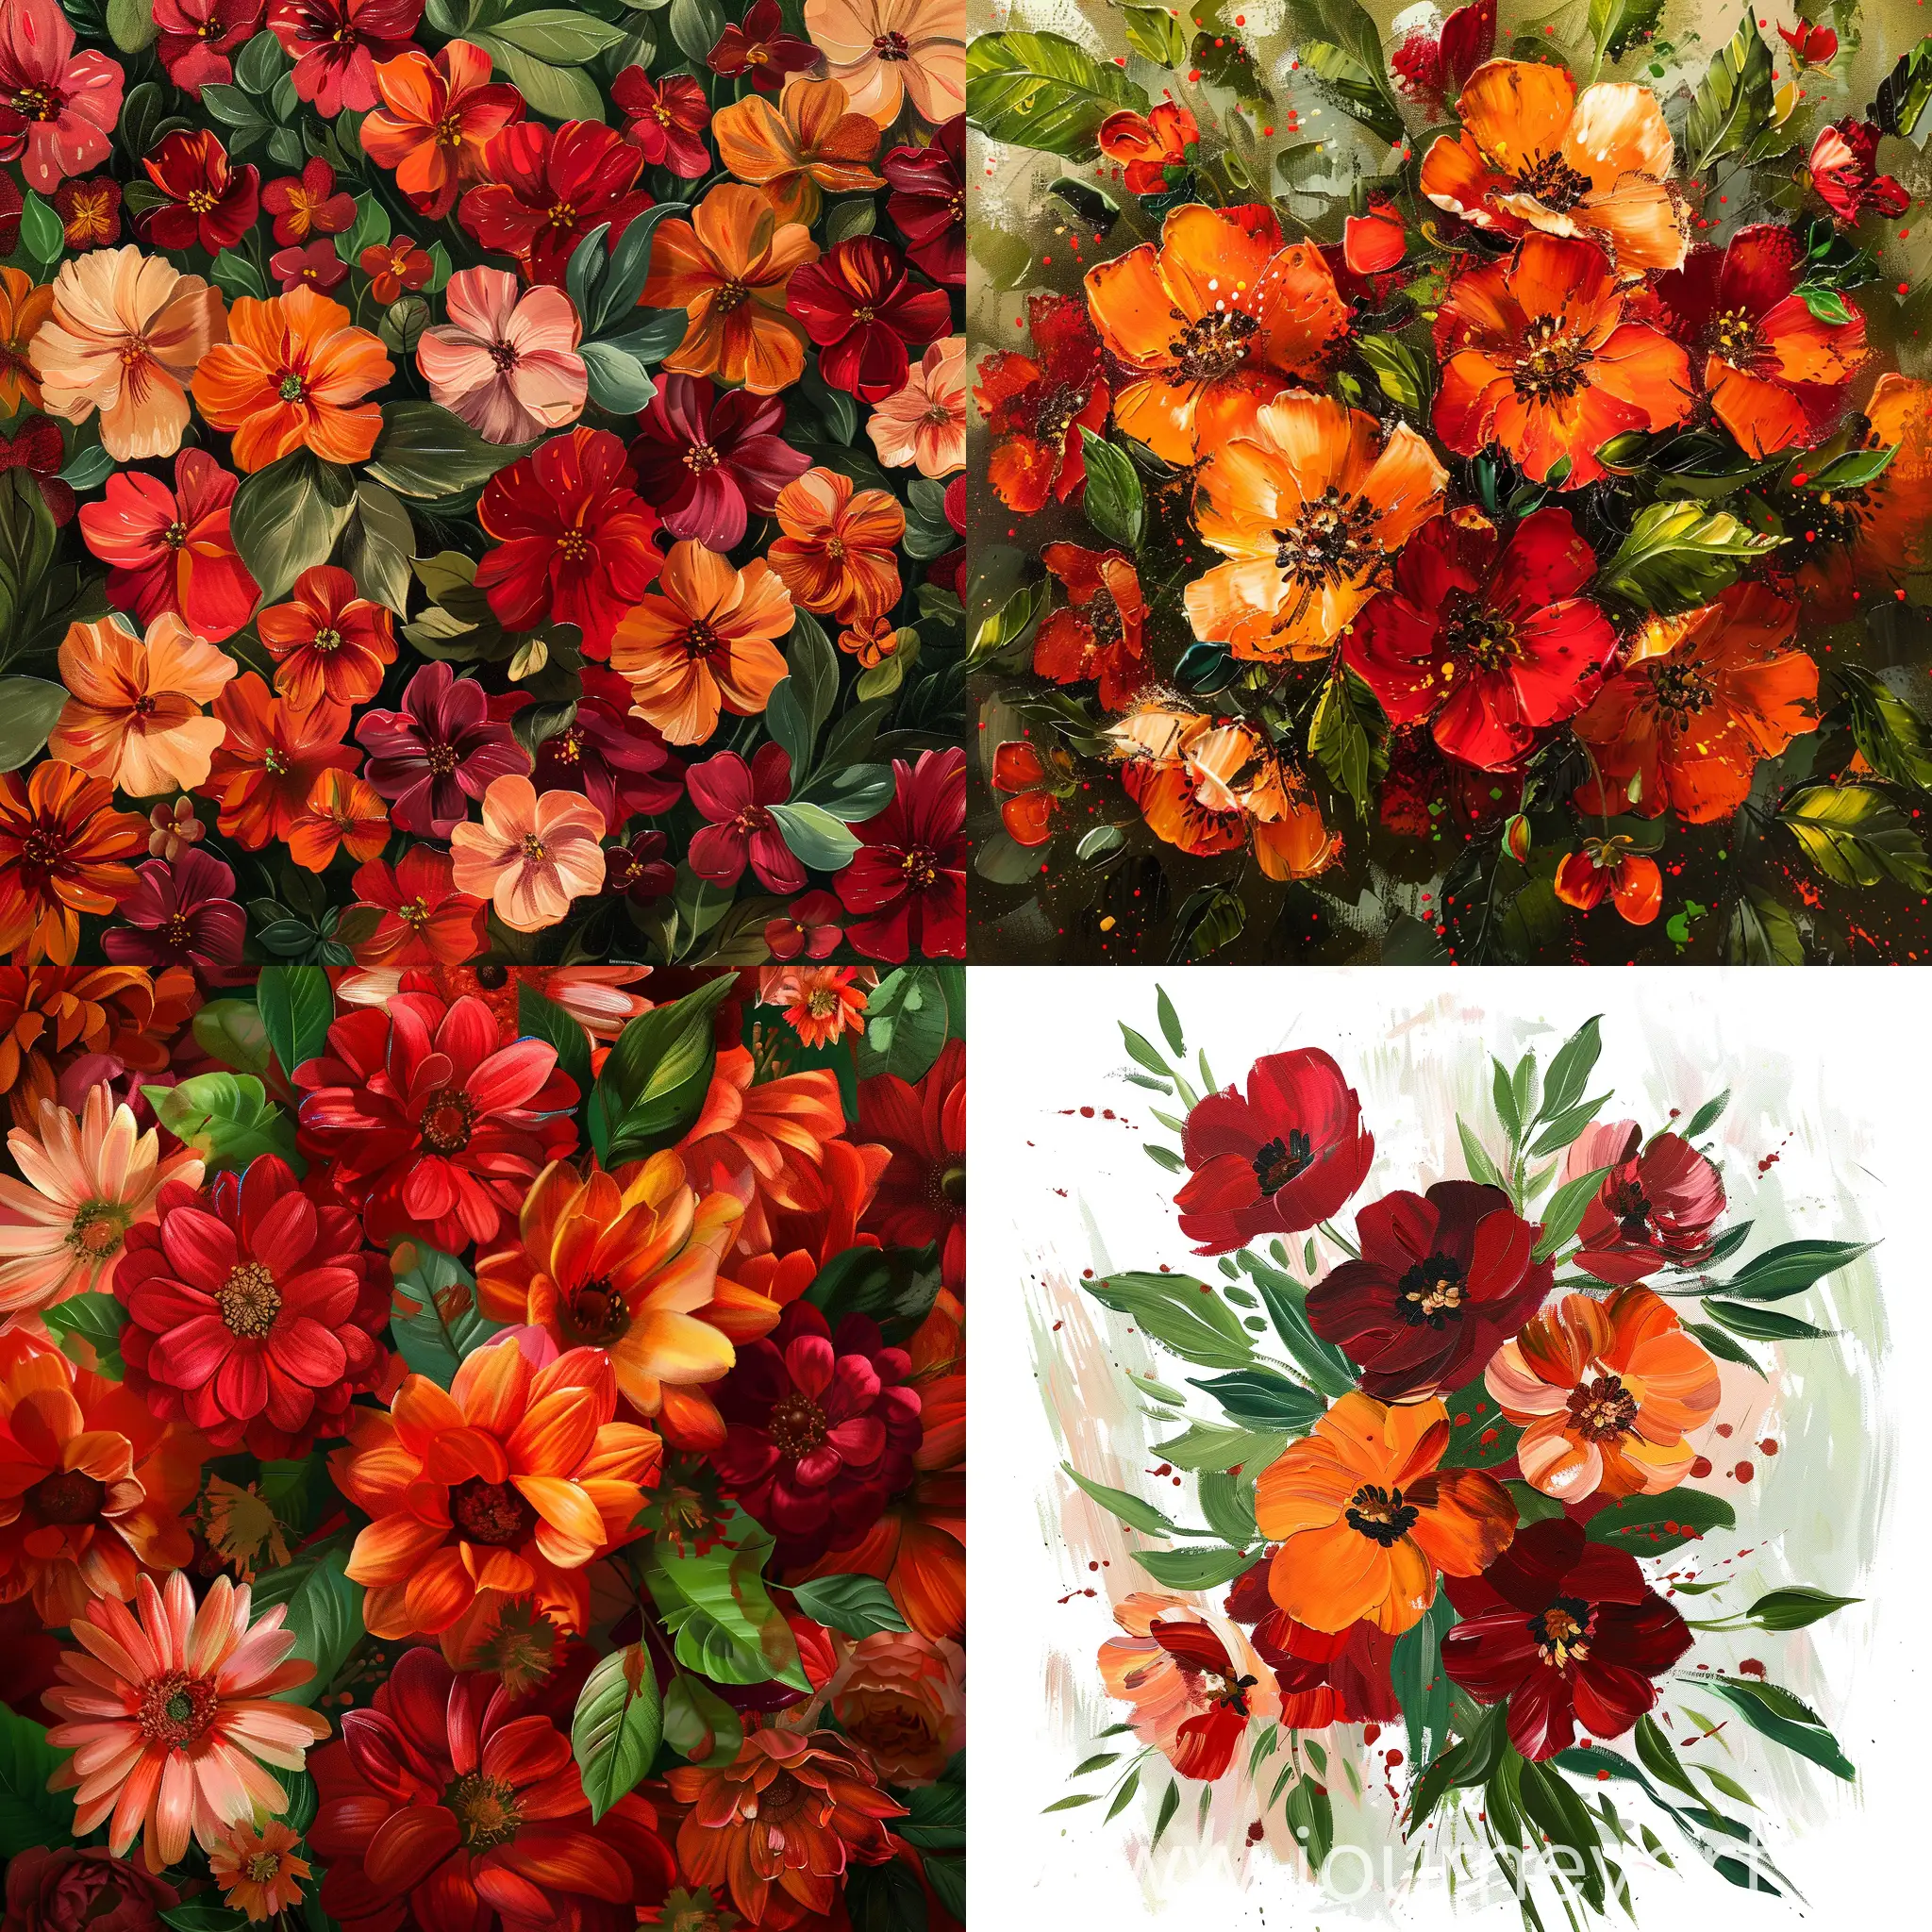 Vibrant-Bouquet-of-Red-and-Orange-Flowers-with-Green-Leaf-Embellishments-Oil-Painting-Illustration